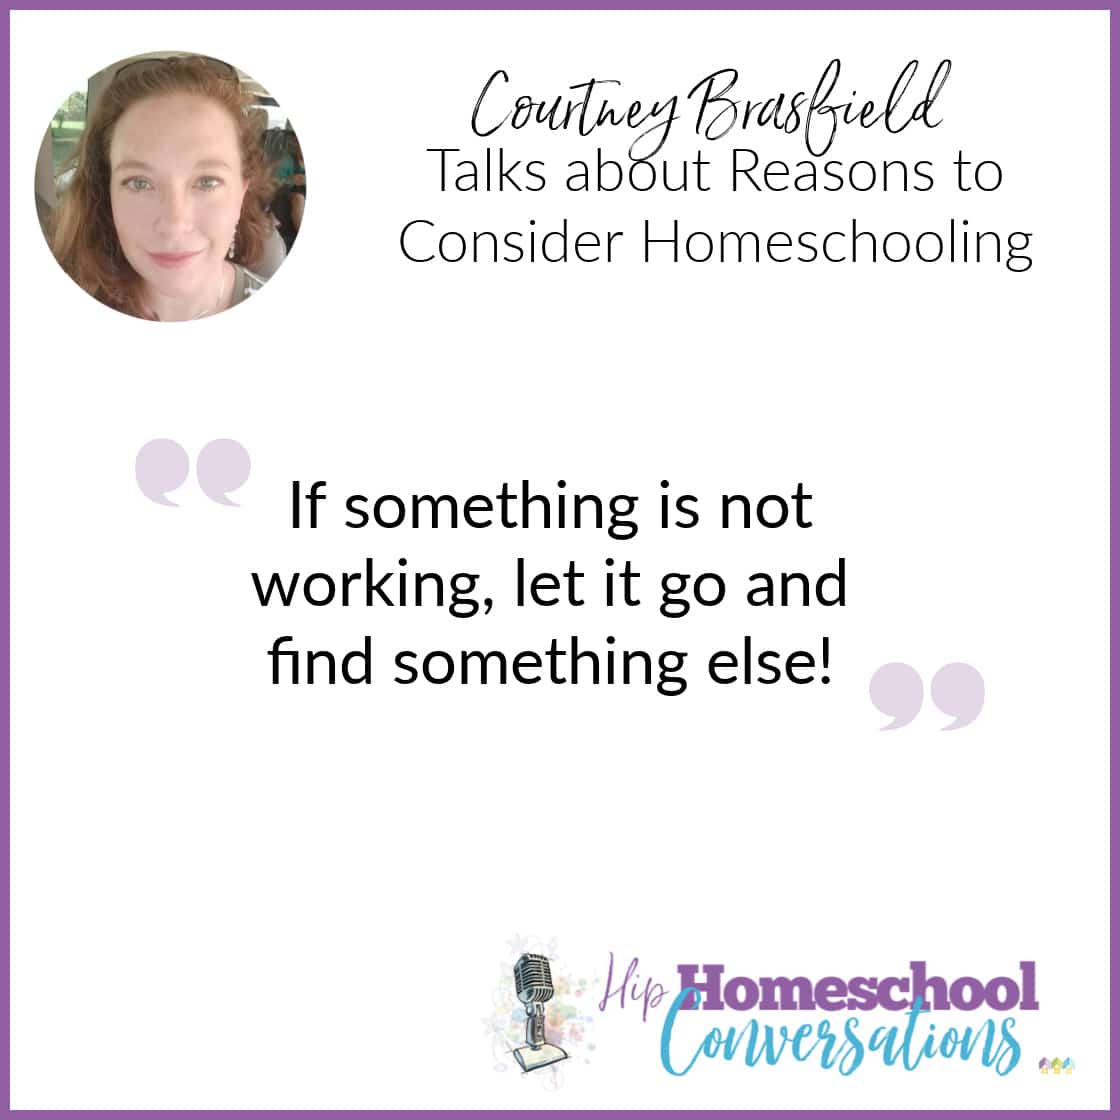 Courtney Brasfield is a Hip Homeschool Moms group member, a fellow traveler with Hip Homeschool Road Trips, mom of multiples, and homeschooling mom who loves the freedom of homeschooling. She talks about reasons to consider homeschooling,